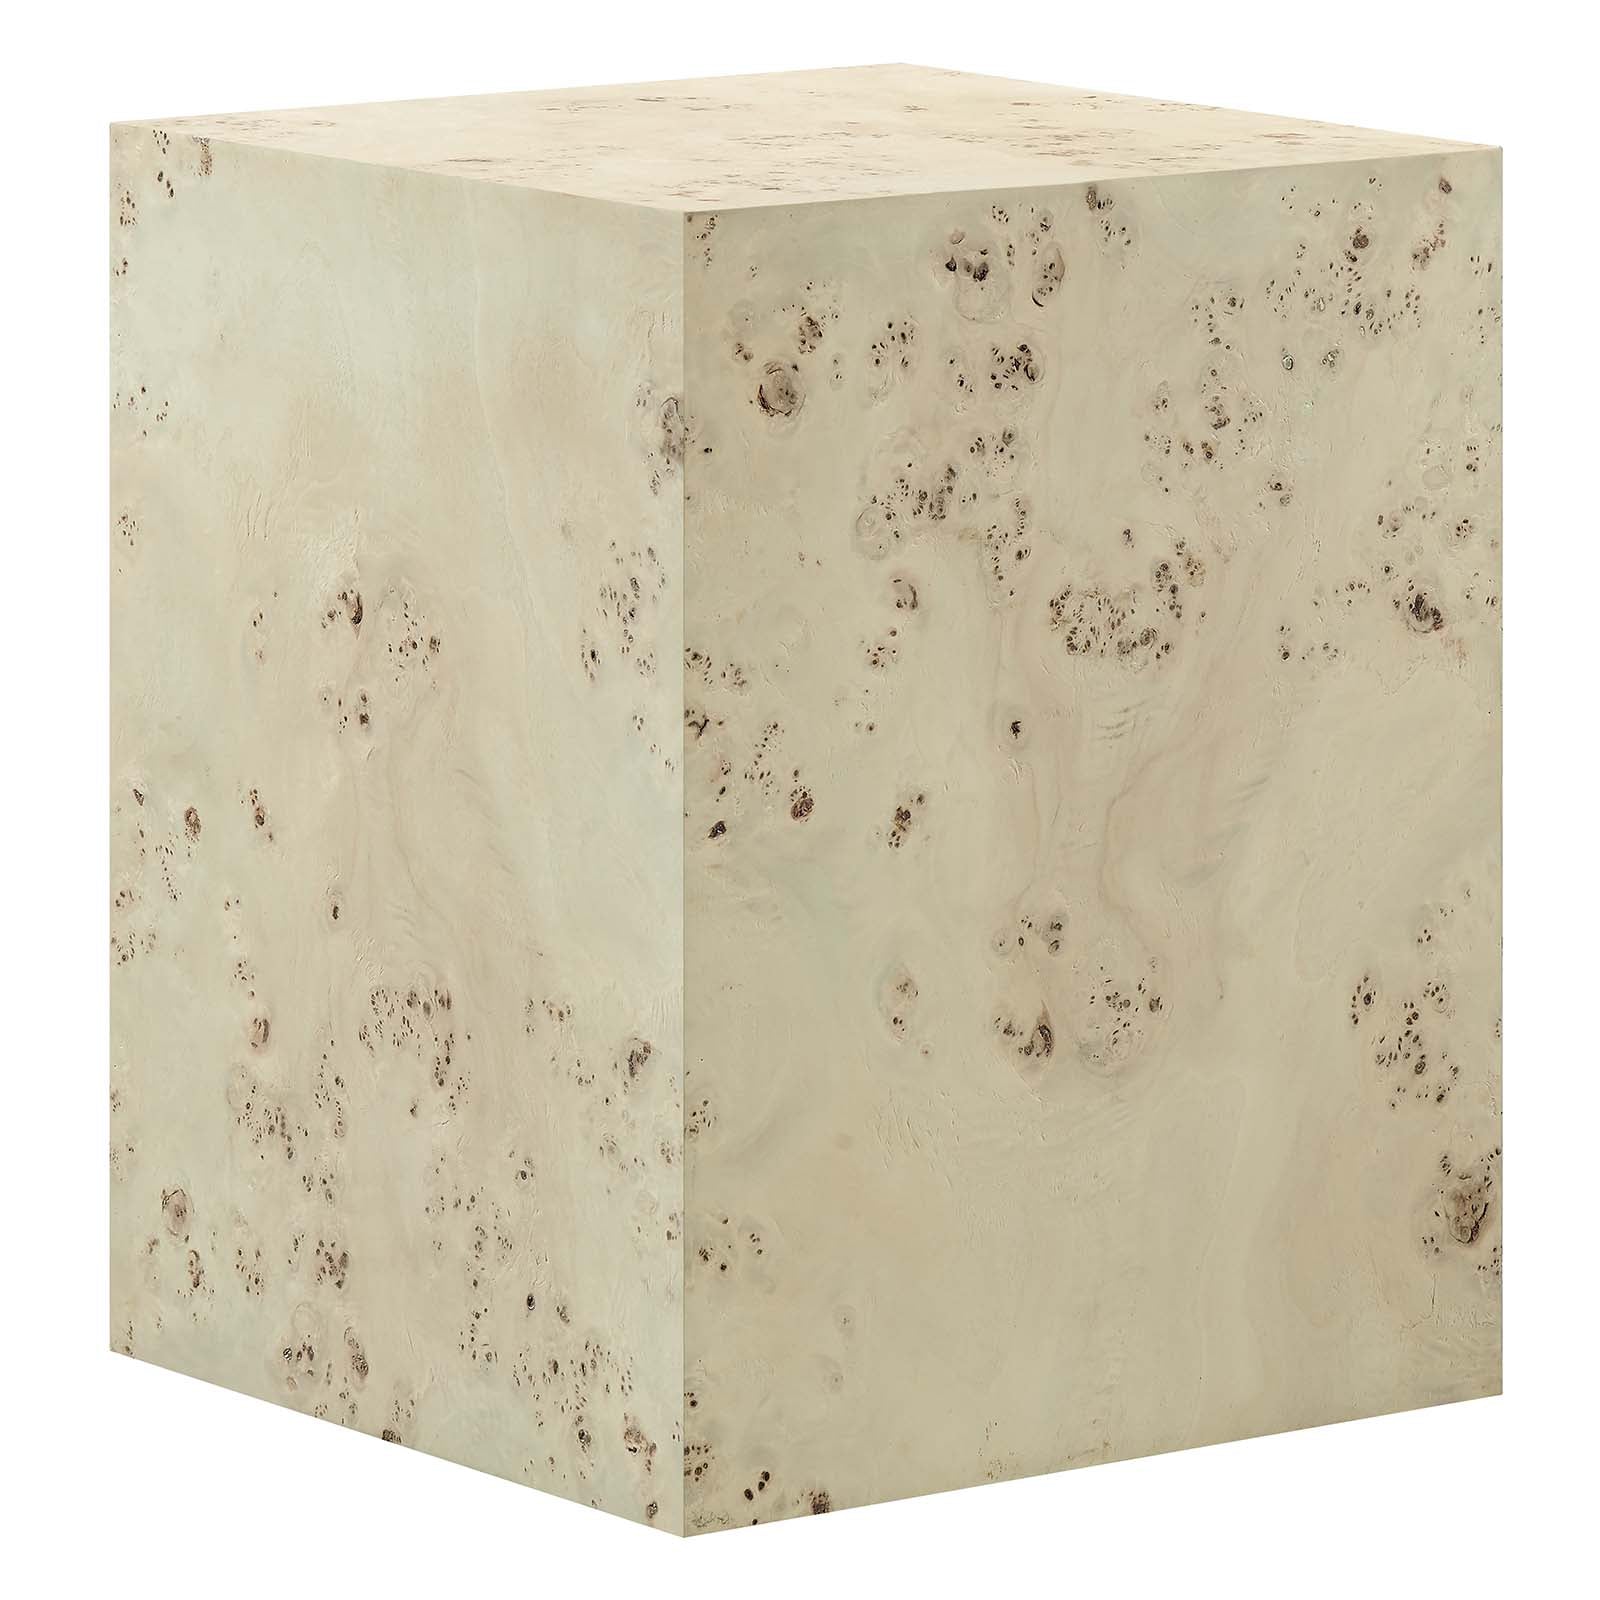 Cosmos 16" Square Burl Wood Side Table - East Shore Modern Home Furnishings